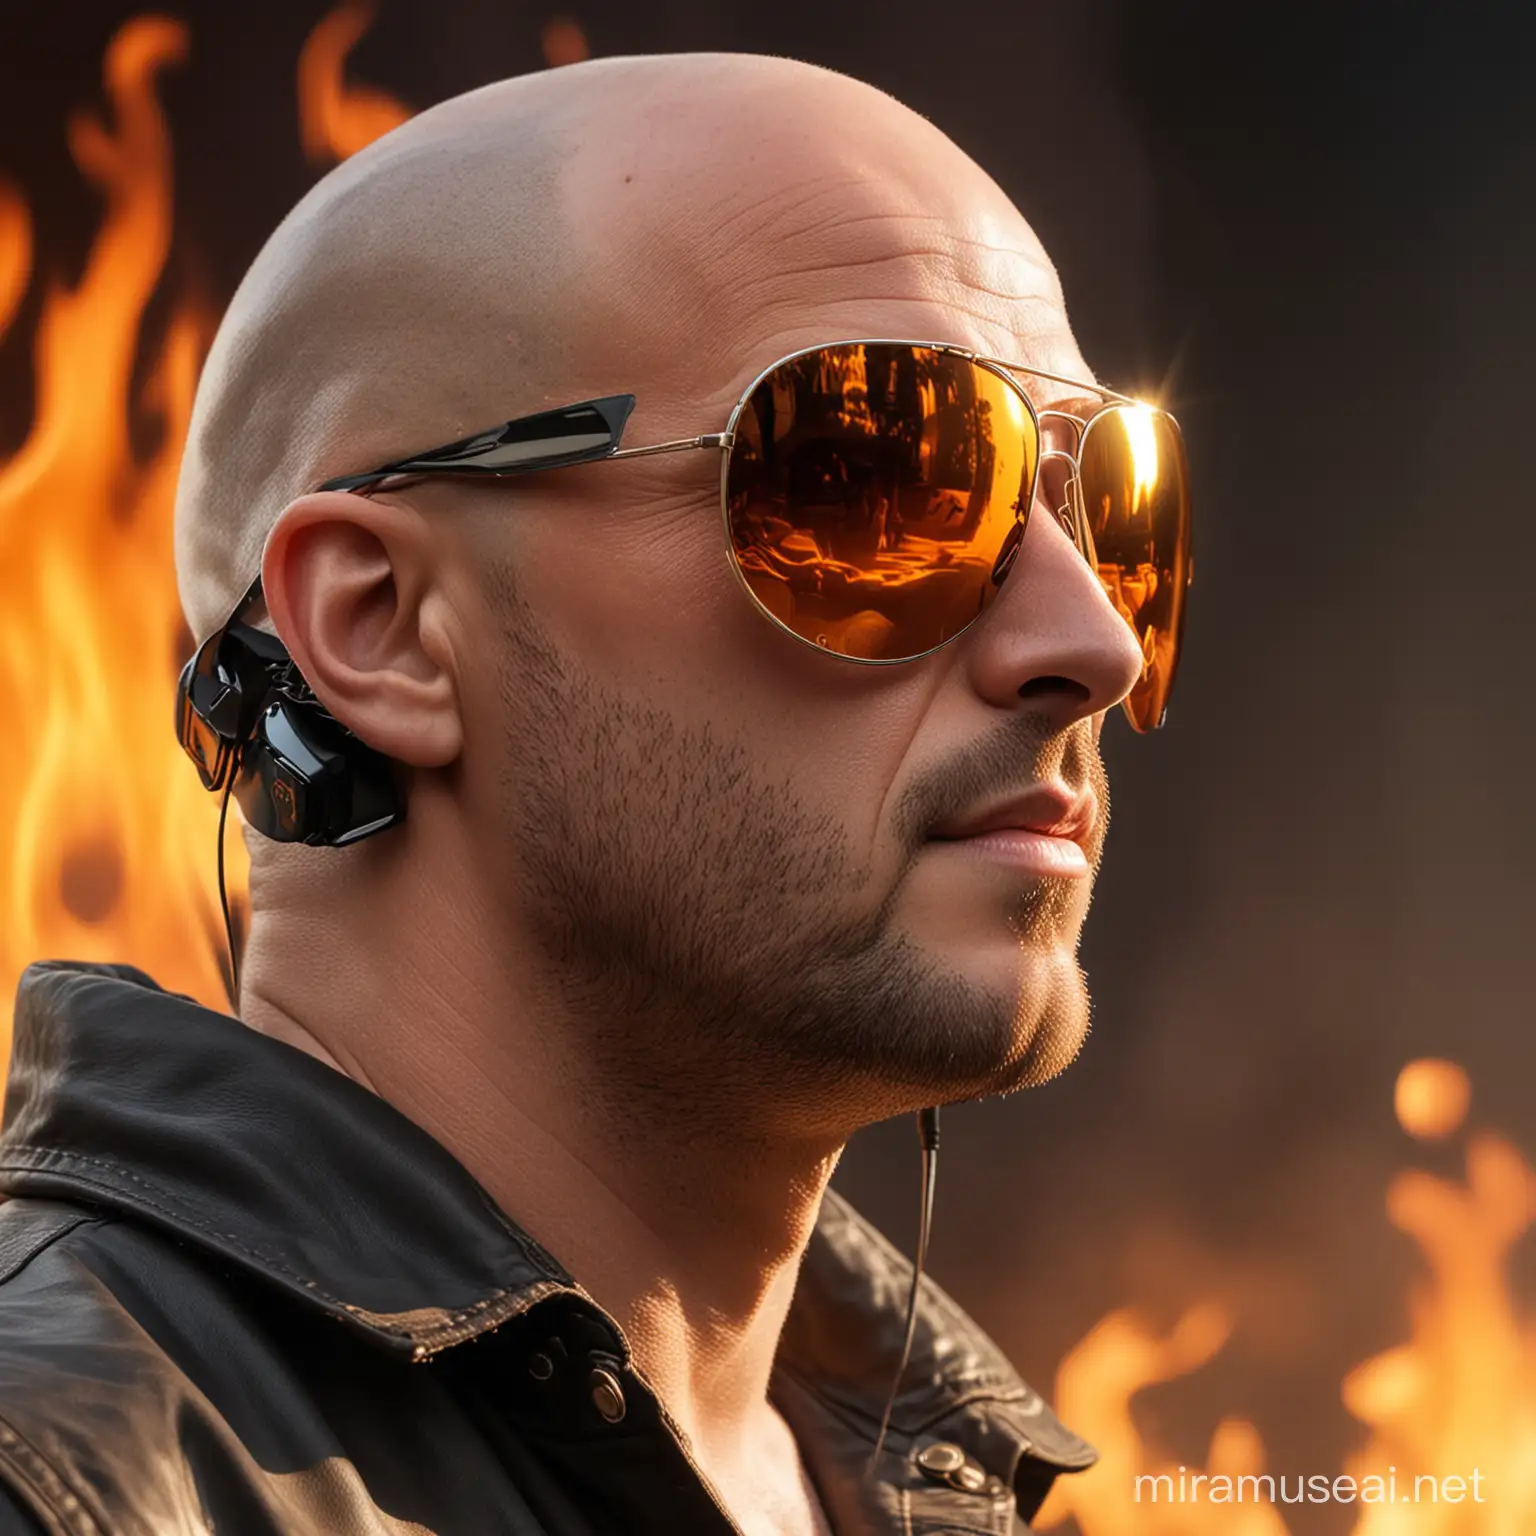 bald man with a headset and aviators sunglasses that have flames in the reflection on the lenses
